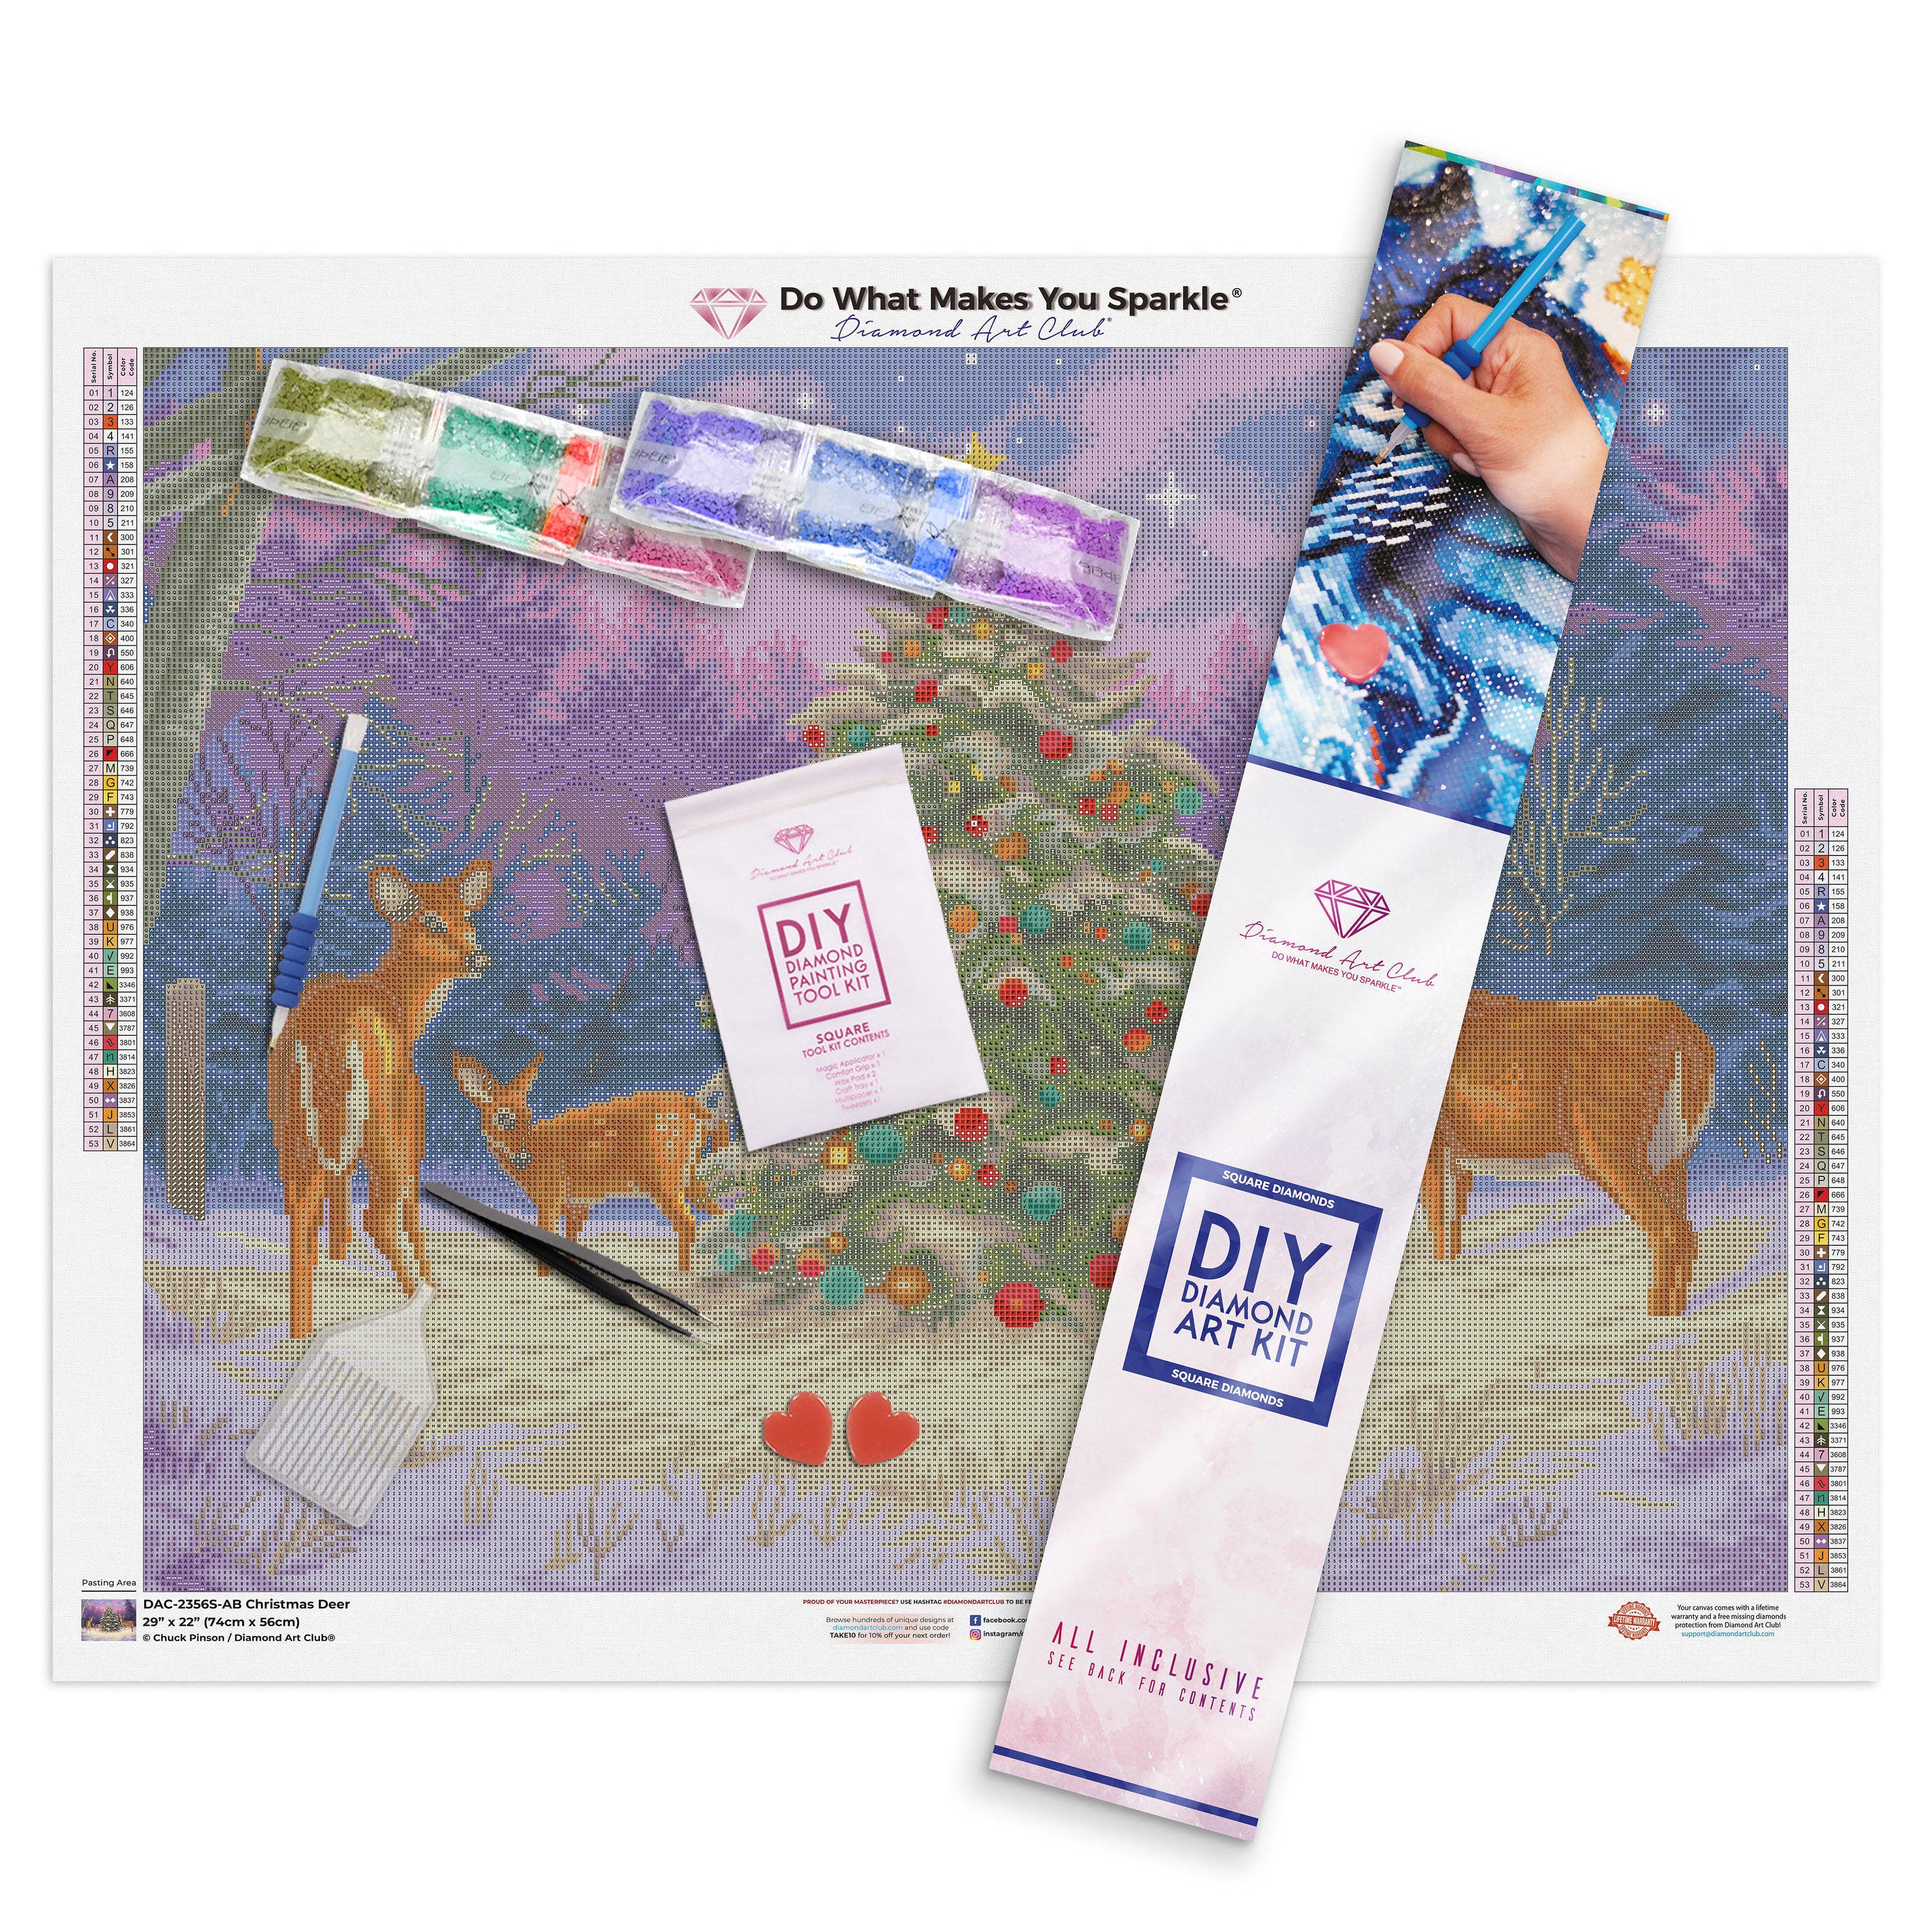 Christmas Deer Diamond Art Club unboxing. 🦌🎄This was my most